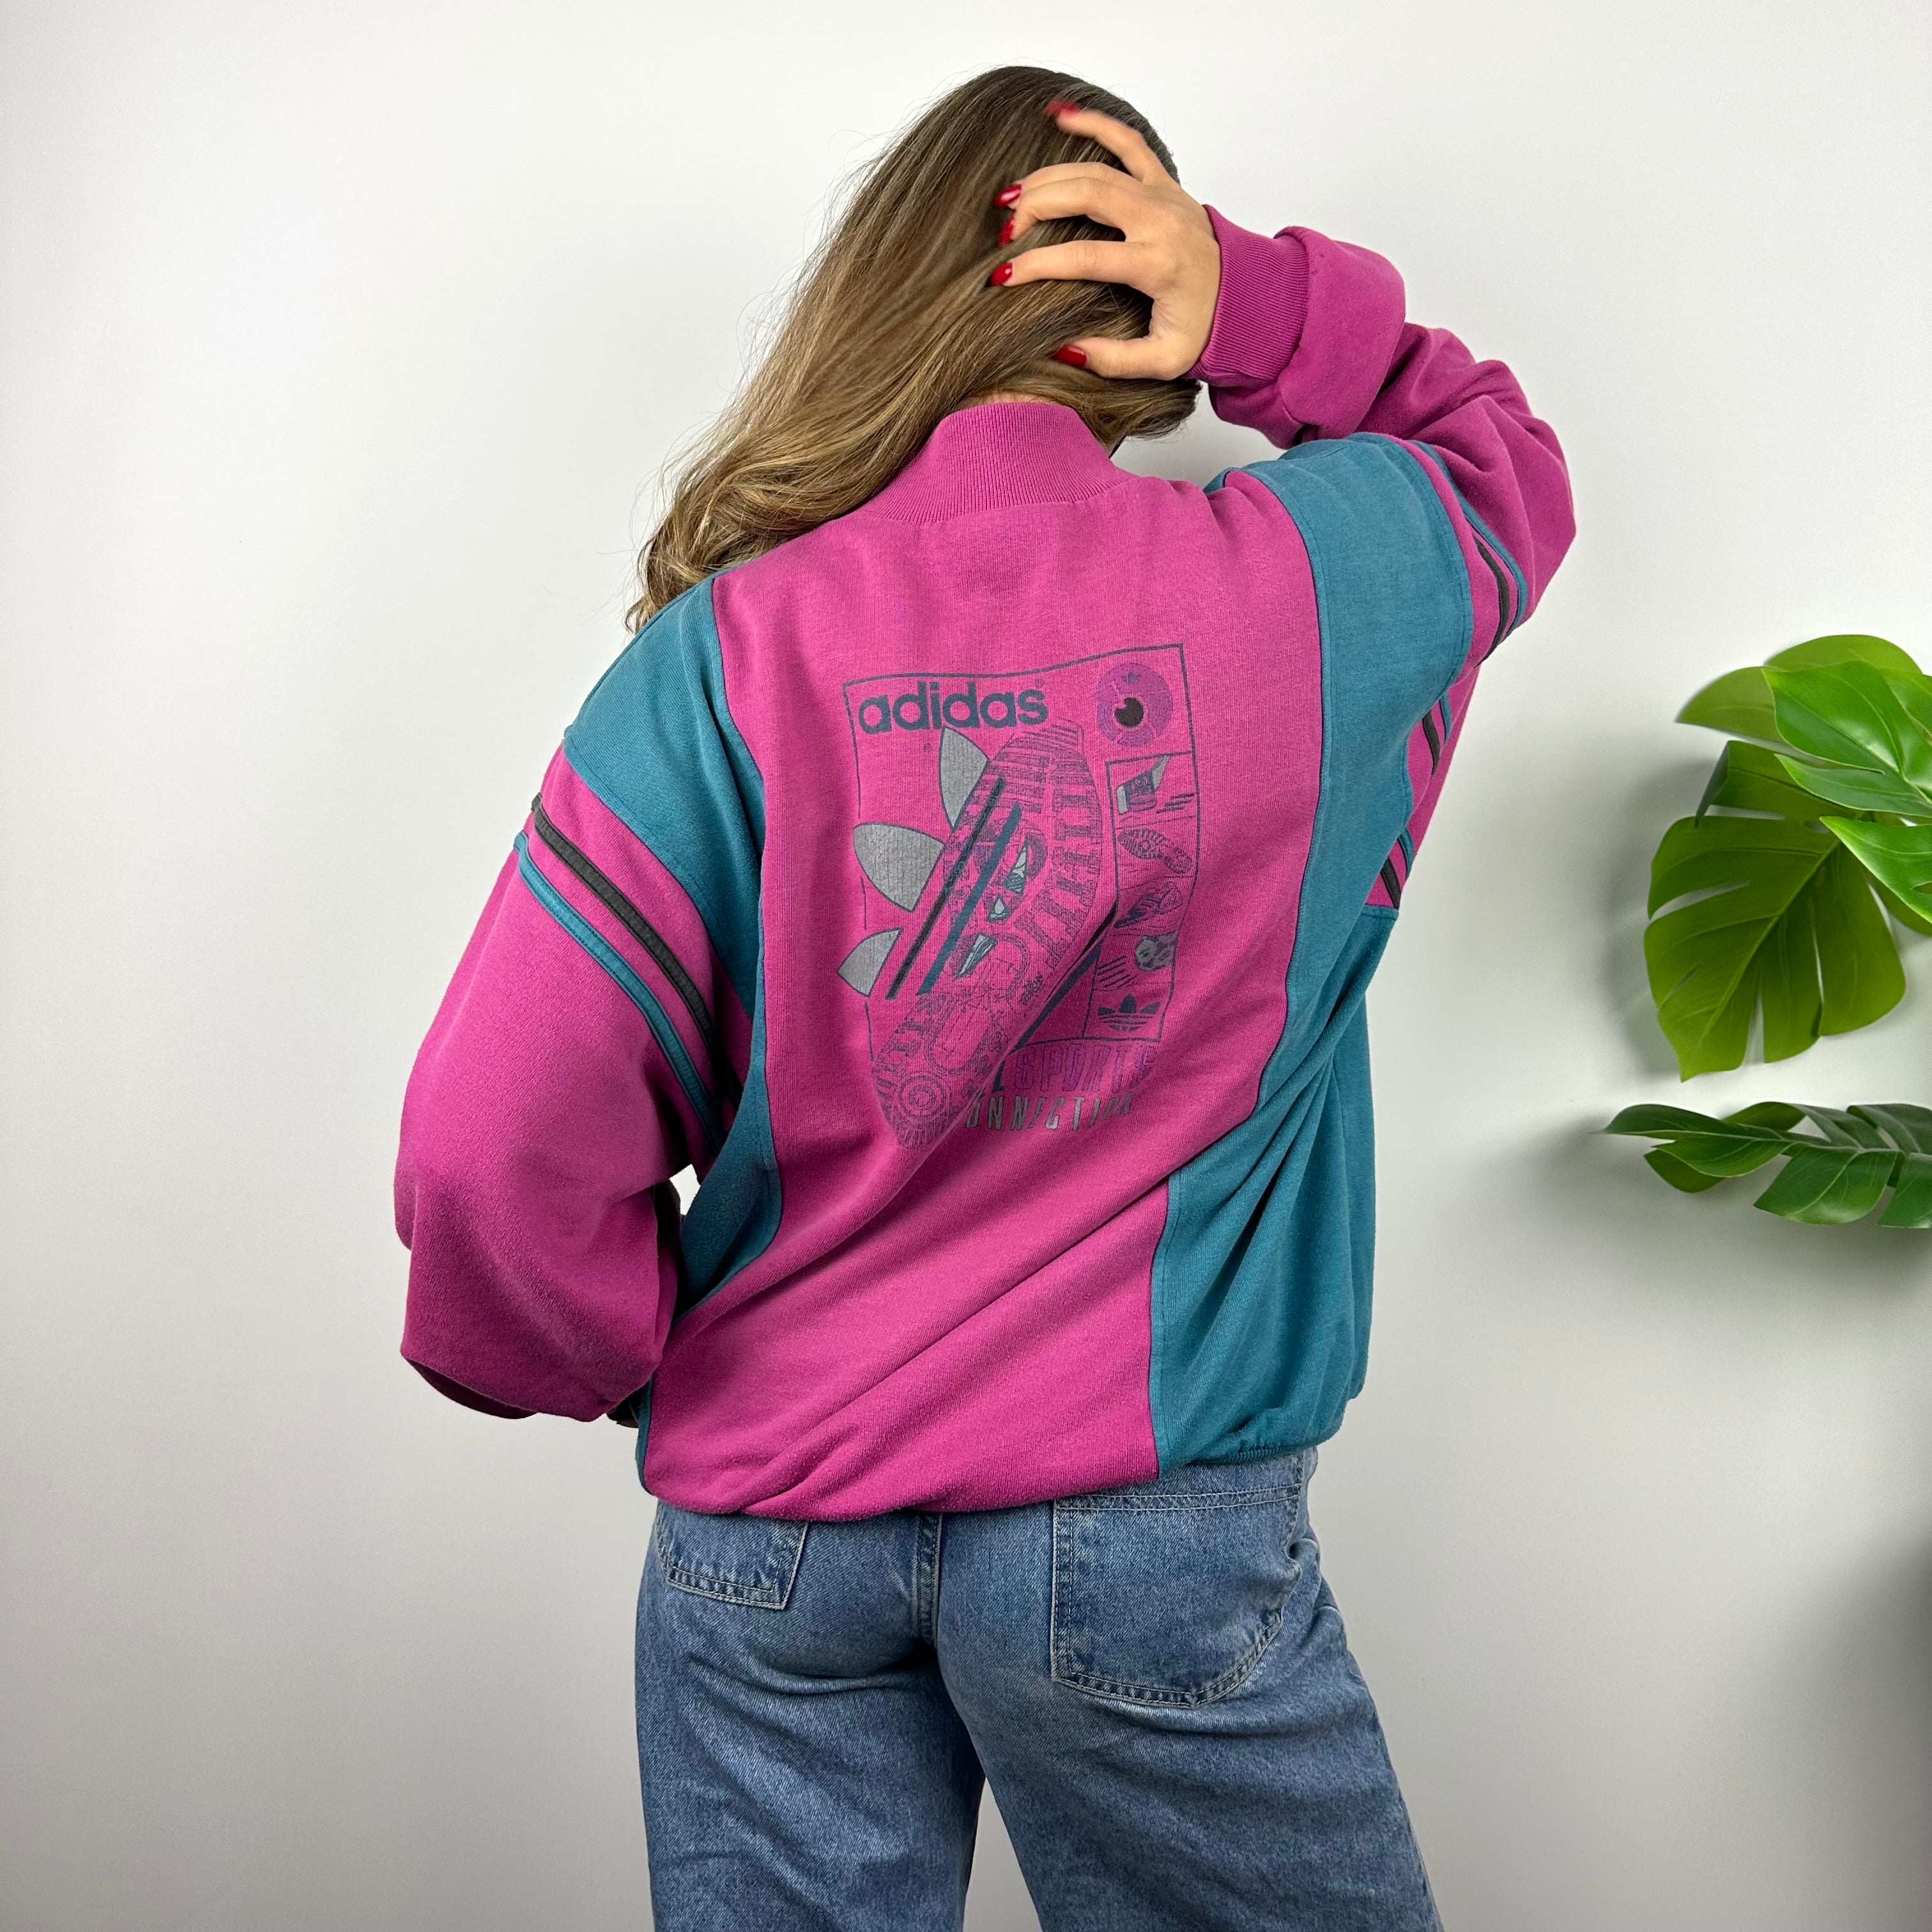 Adidas RARE Turquoise Blue & Pink Spell Out Sweatshirt (L)